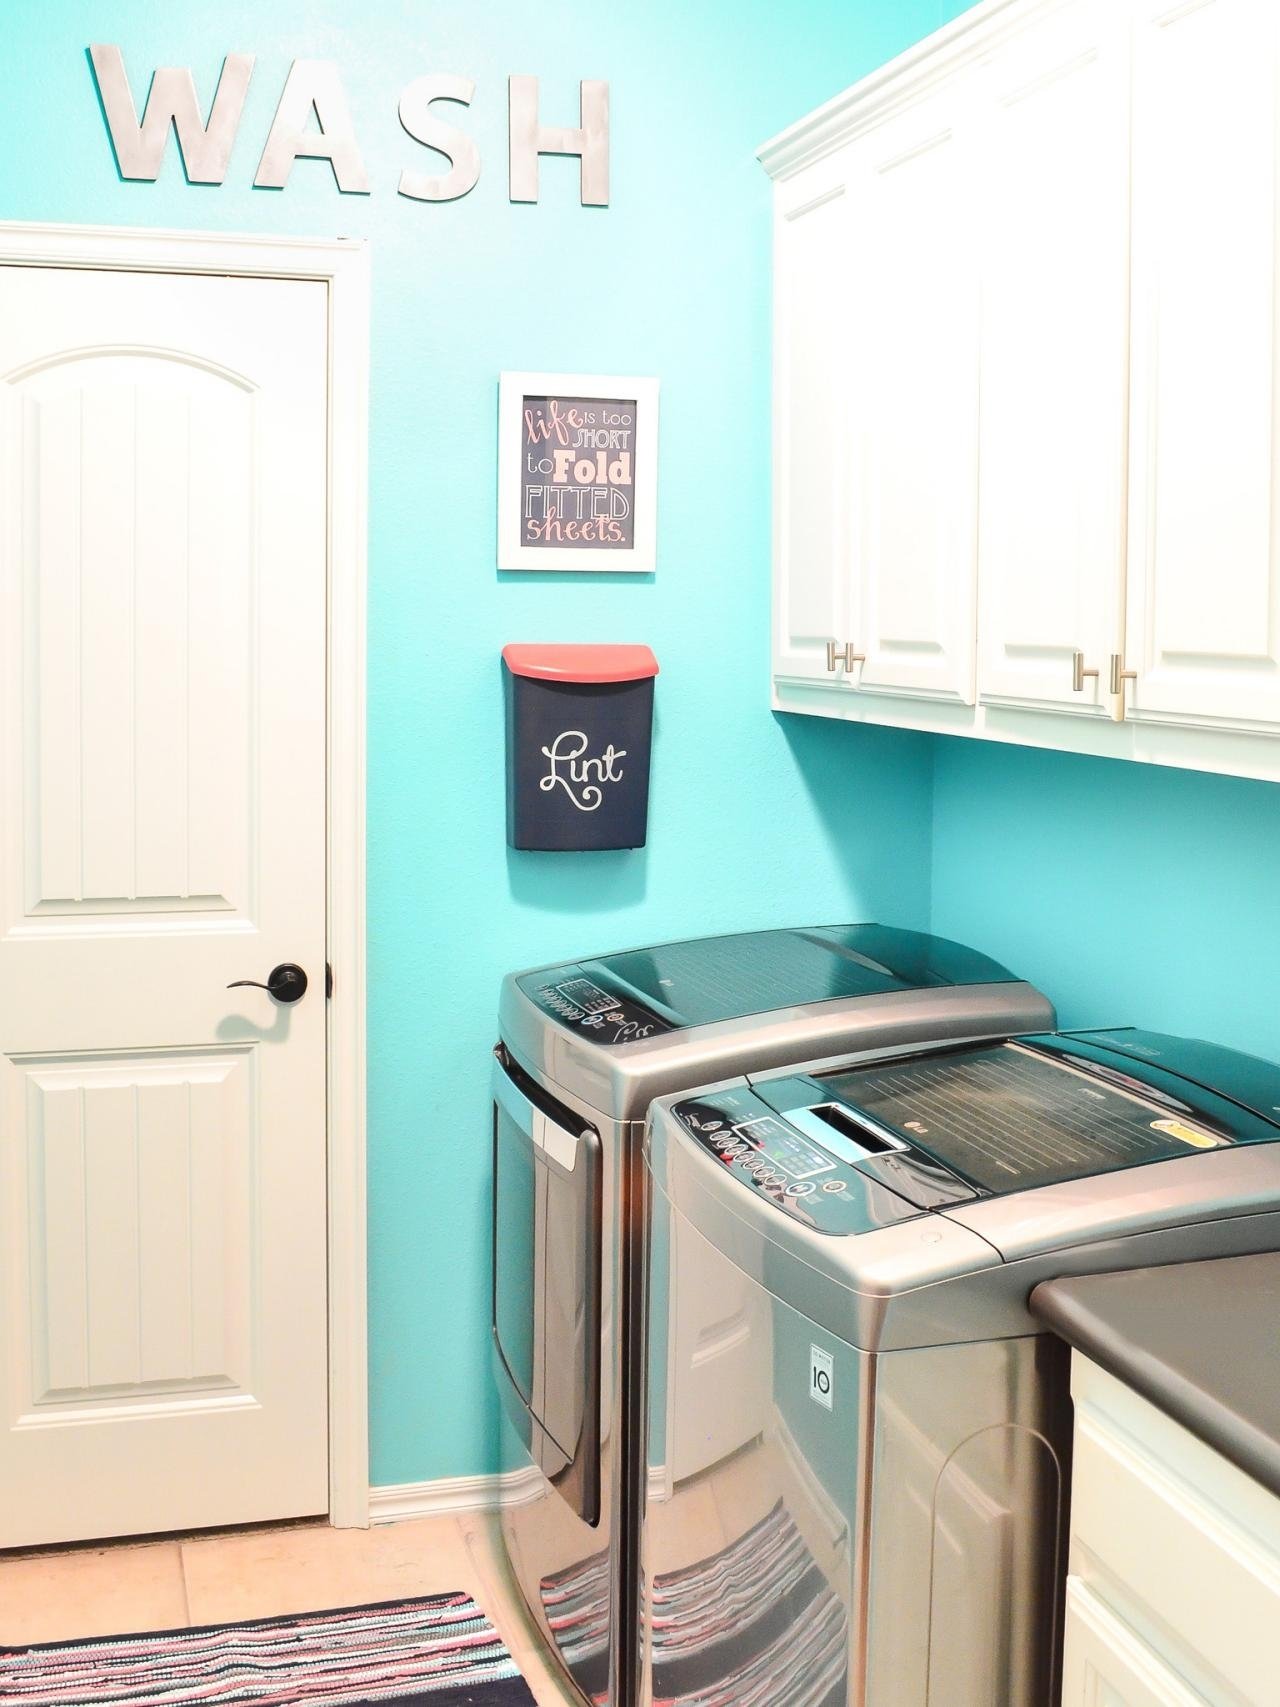 10 Unique Laundry Room Ideas Small Spaces space saving laundry ideas grousedays 2022